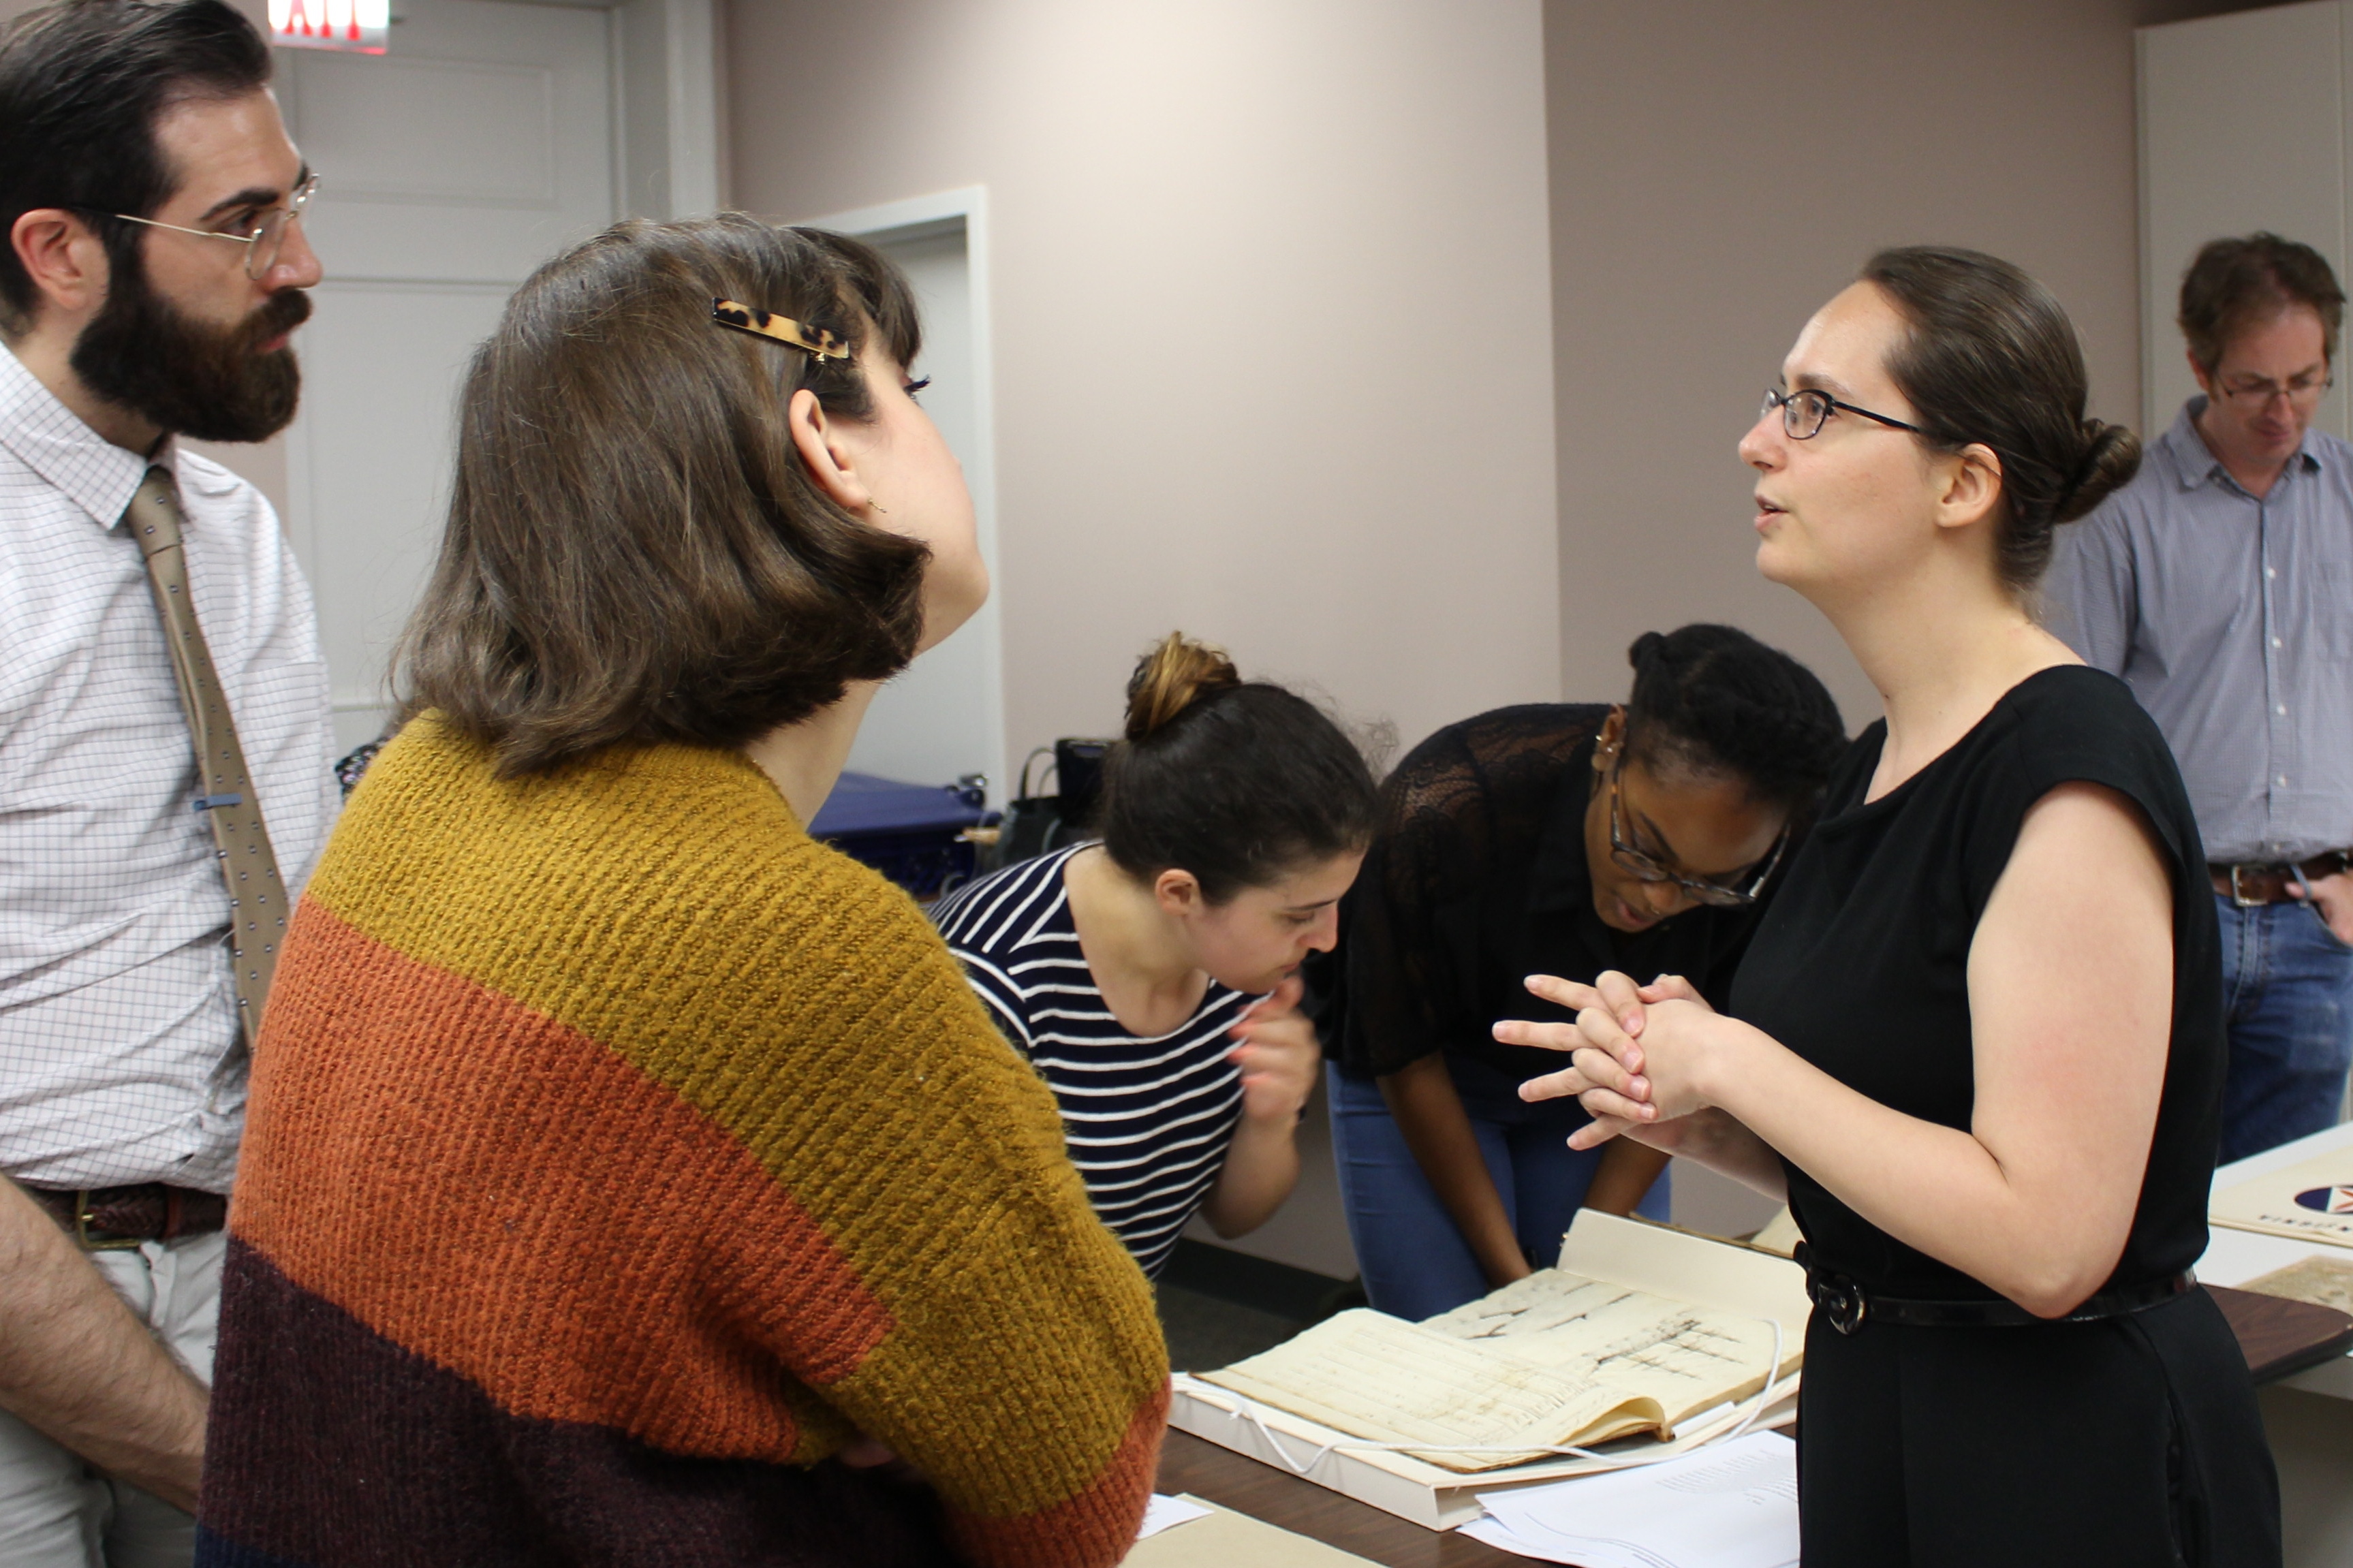 Curatorial Assistant Laura Hapke speaks with Marketing Intern Olivia Luntz and Hamilton Education Program Coordinator William Roka at a recent staff day at the Gilder Lehrman Collection.